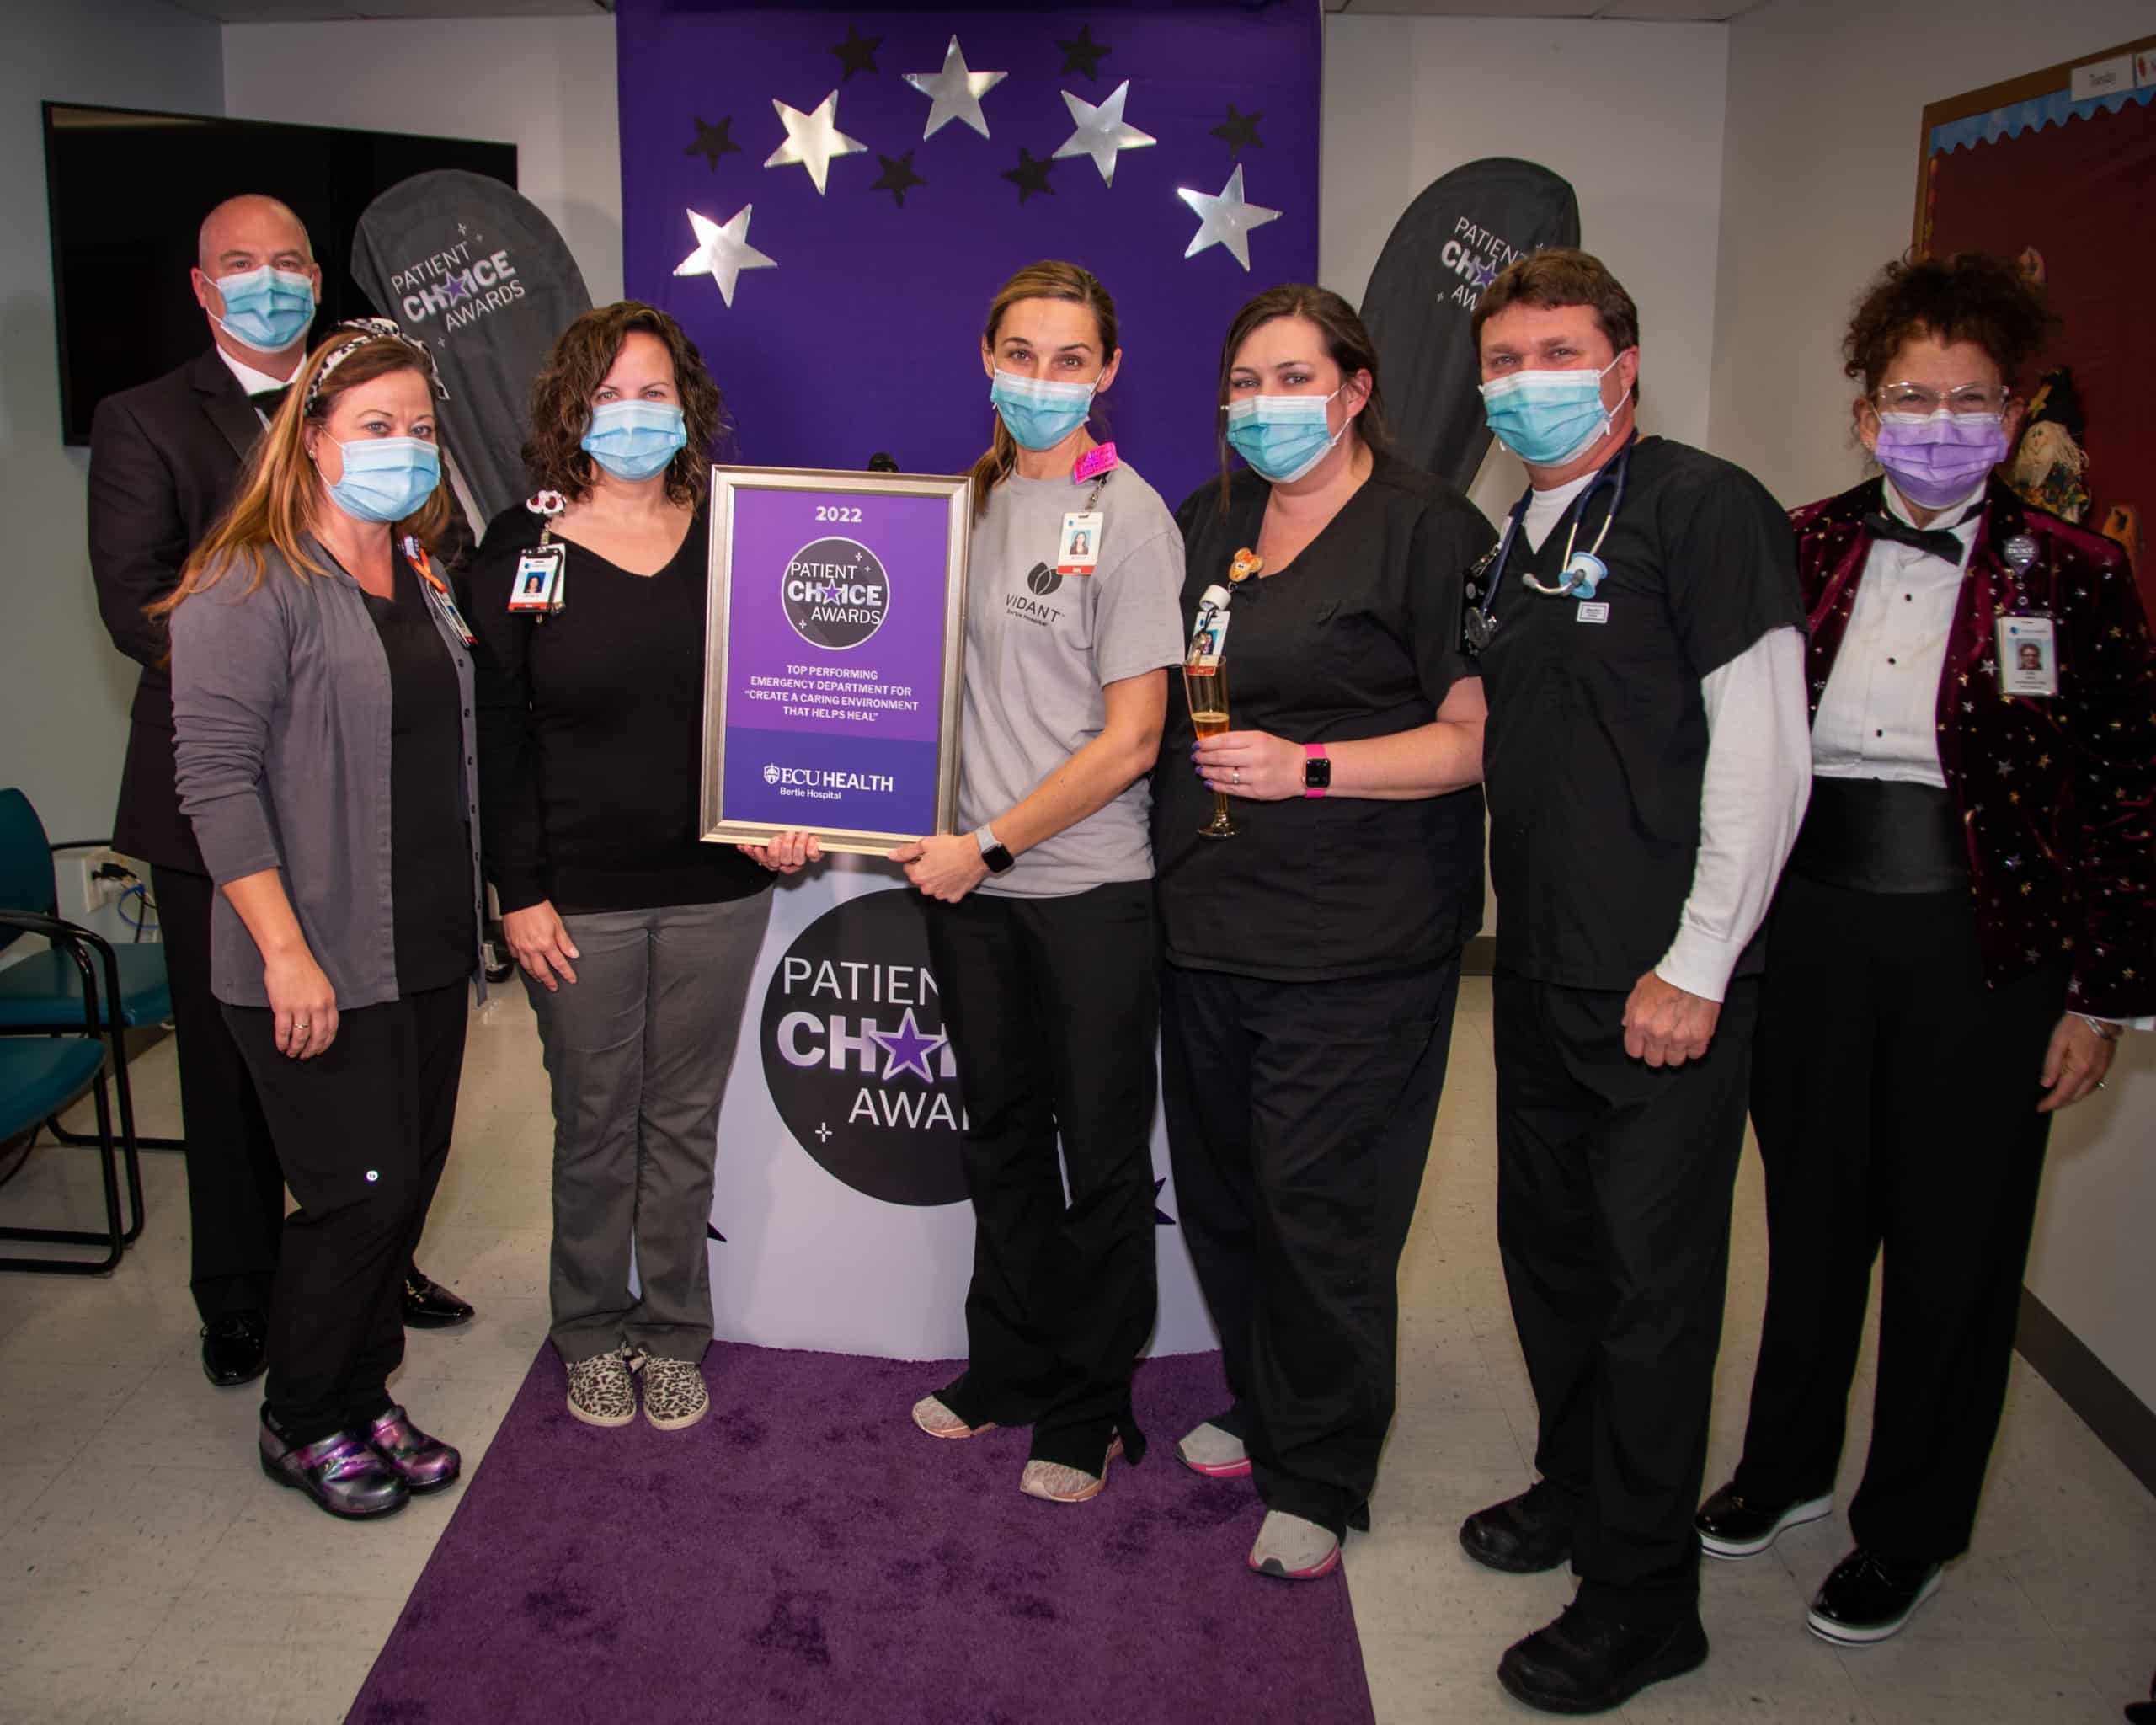 The ECU Health Bertie Hospital – Emergency Department team poses for a photo after winning the Patient Choice Award for Top Performing Emergency Department for Creating a Caring Environment that Helps Heal.